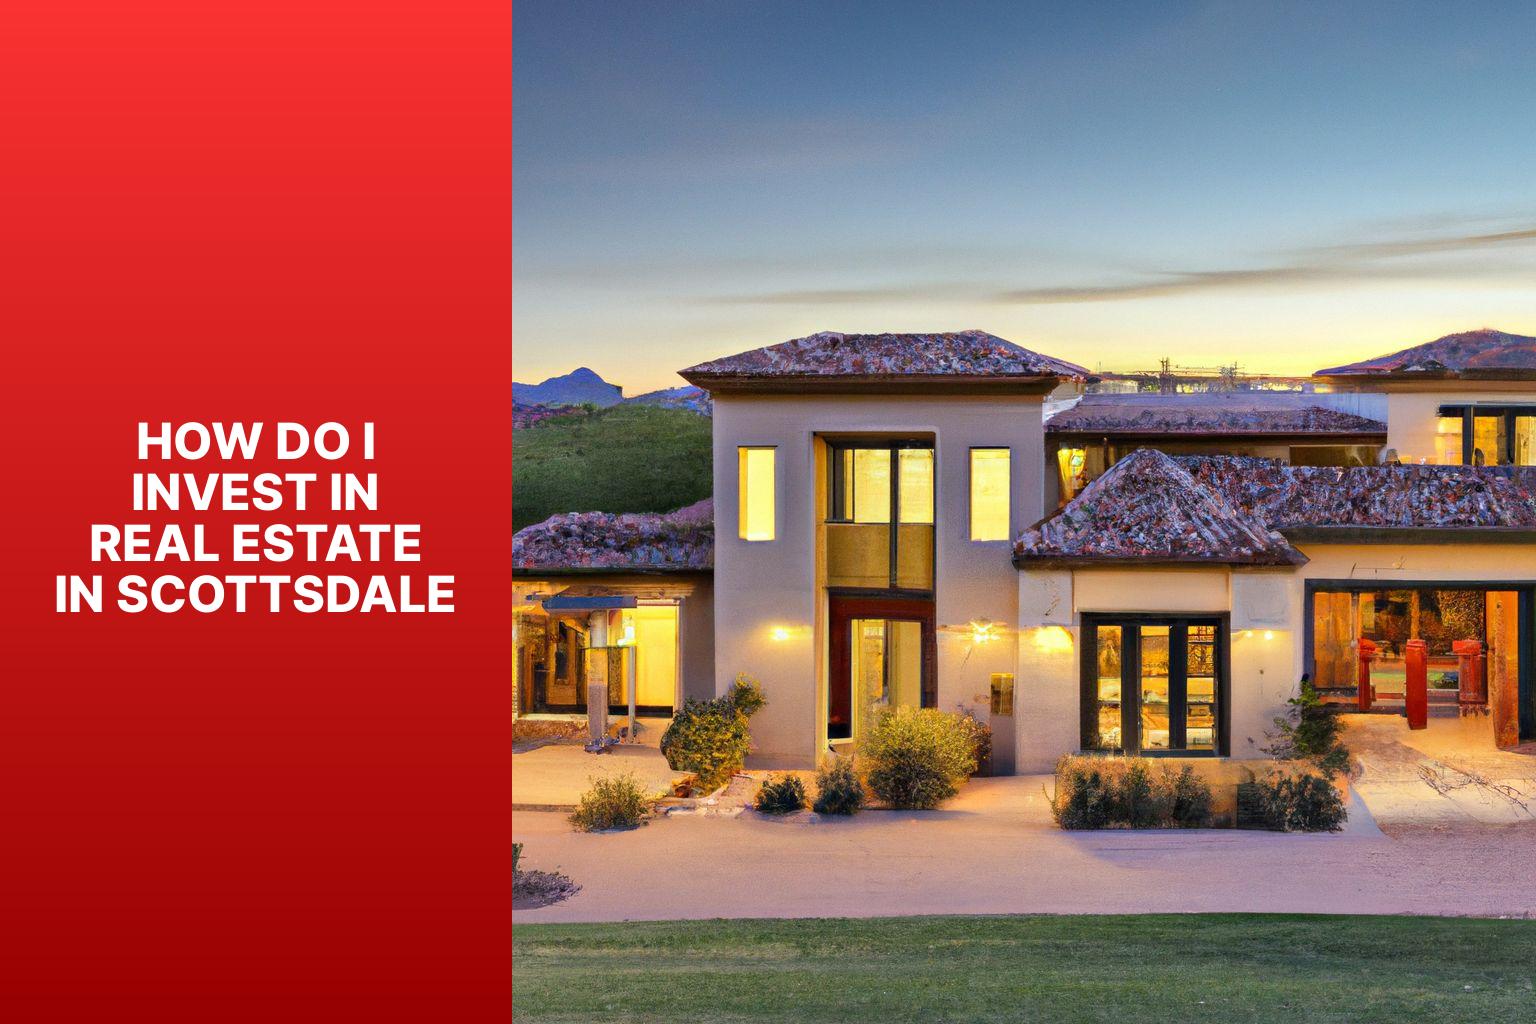 How do I invest in real estate in Scottsdale